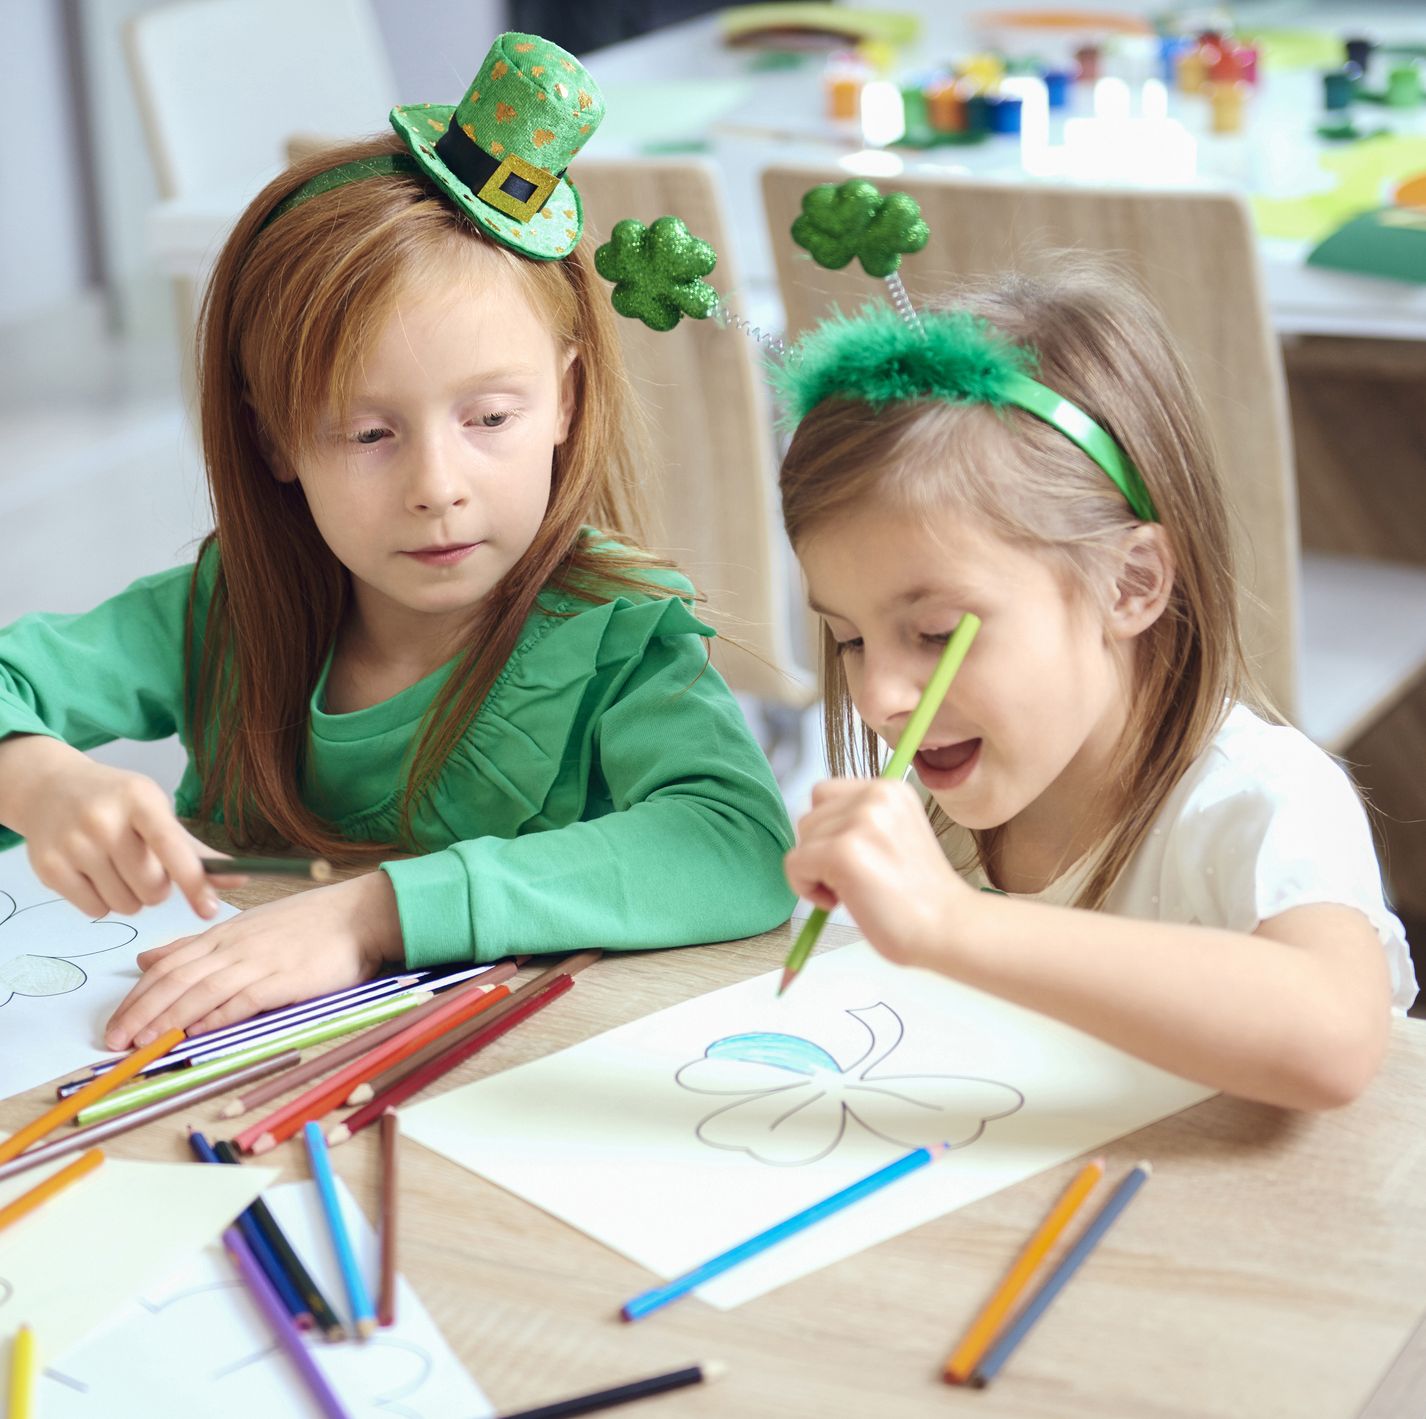 25 Fun and Festive St. Patrick's Day Activities for the Whole Family